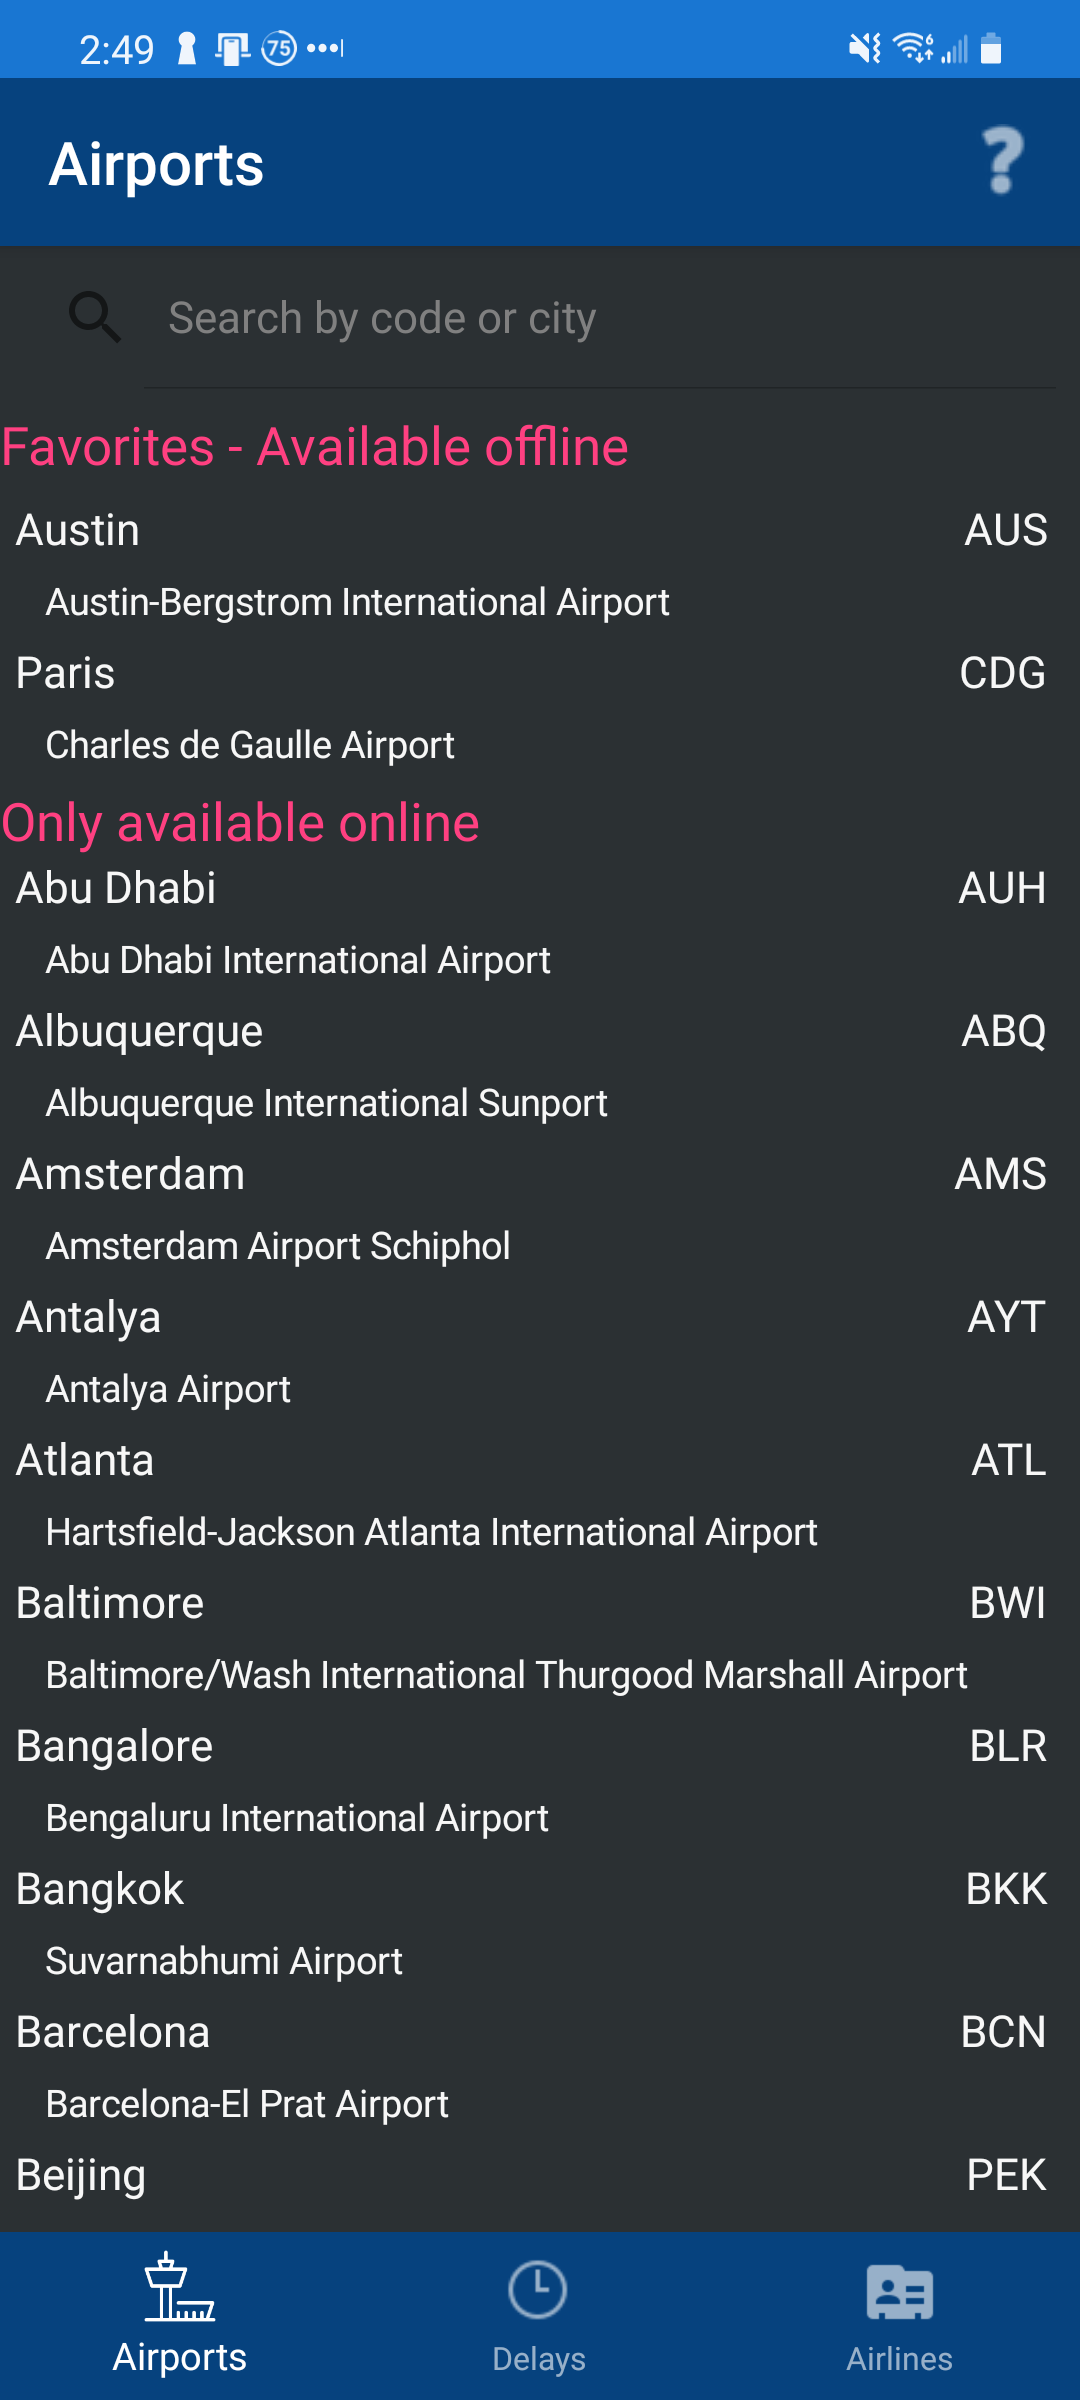 The app has information about more than 90 airports around the world!